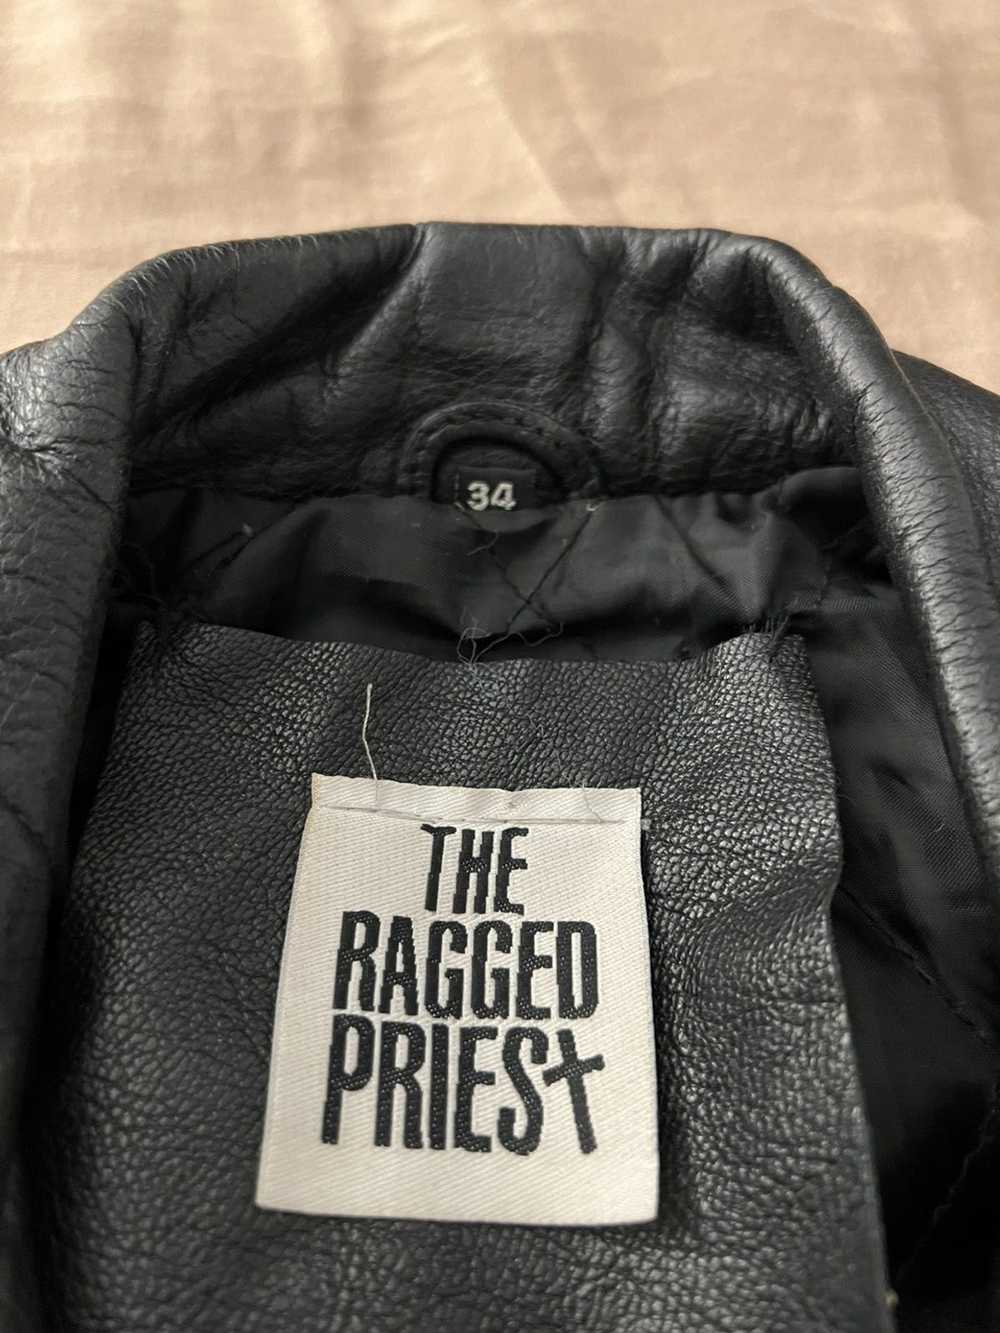 Designer Ragged Priest Leather Jacket with spikes - image 3